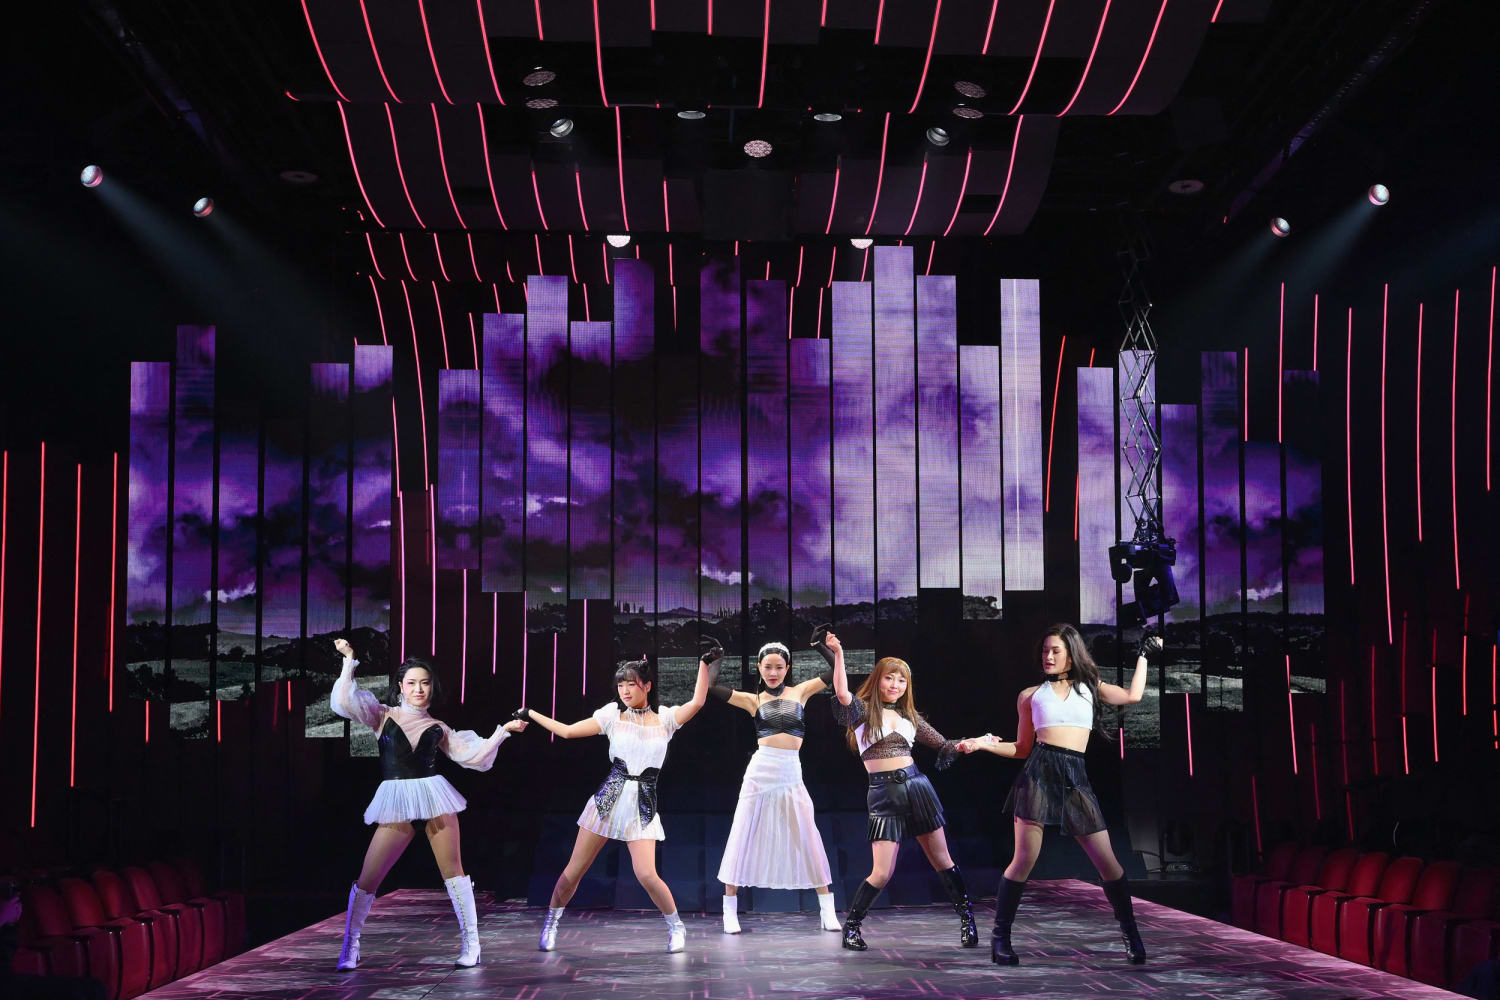 KPOP  Broadway's Must-Experience New Musical